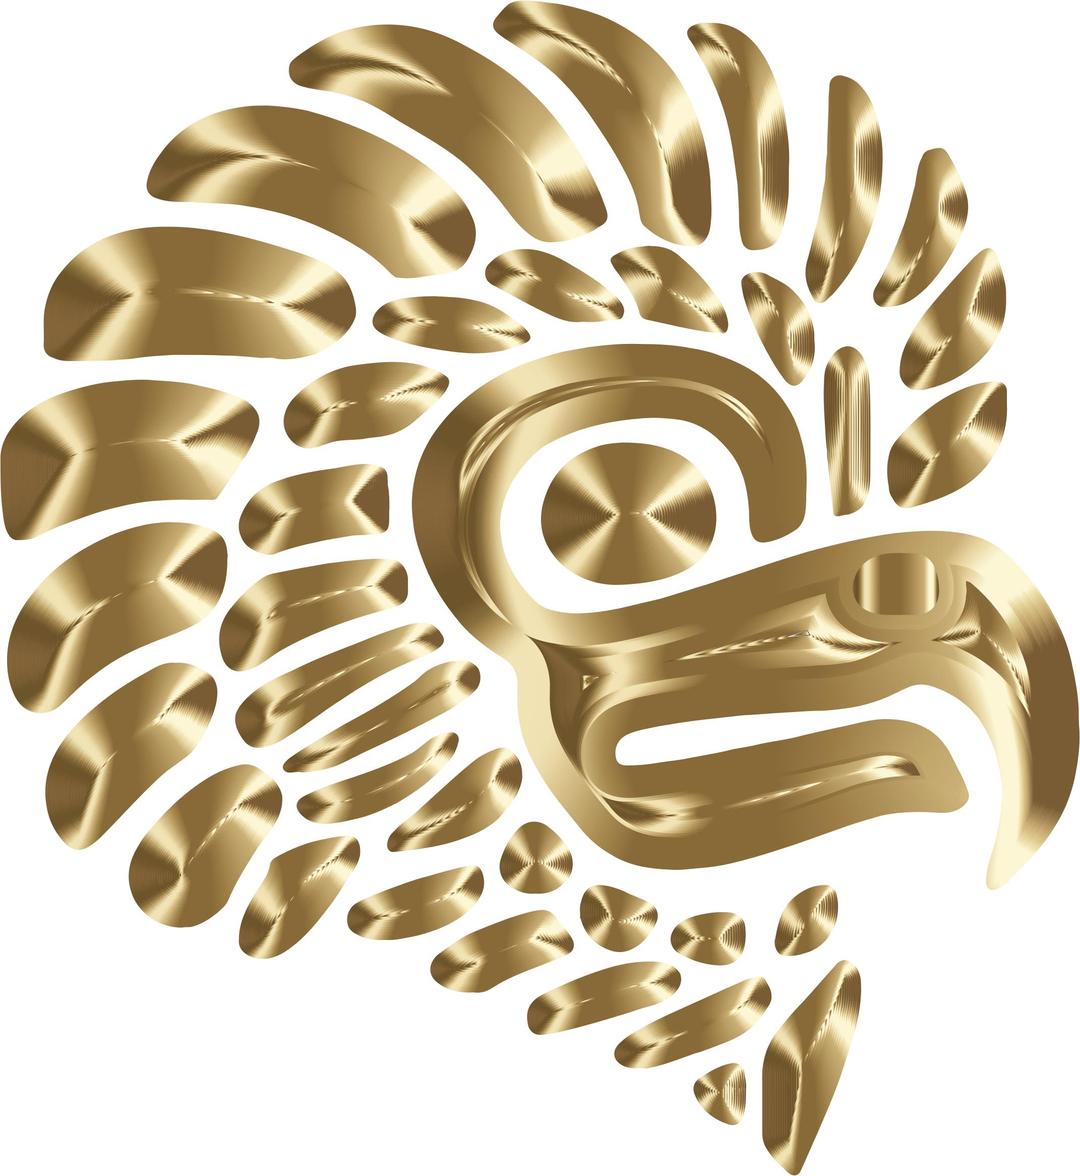 Prismatic Stylized Mexican Eagle Silhouette 7 png transparent